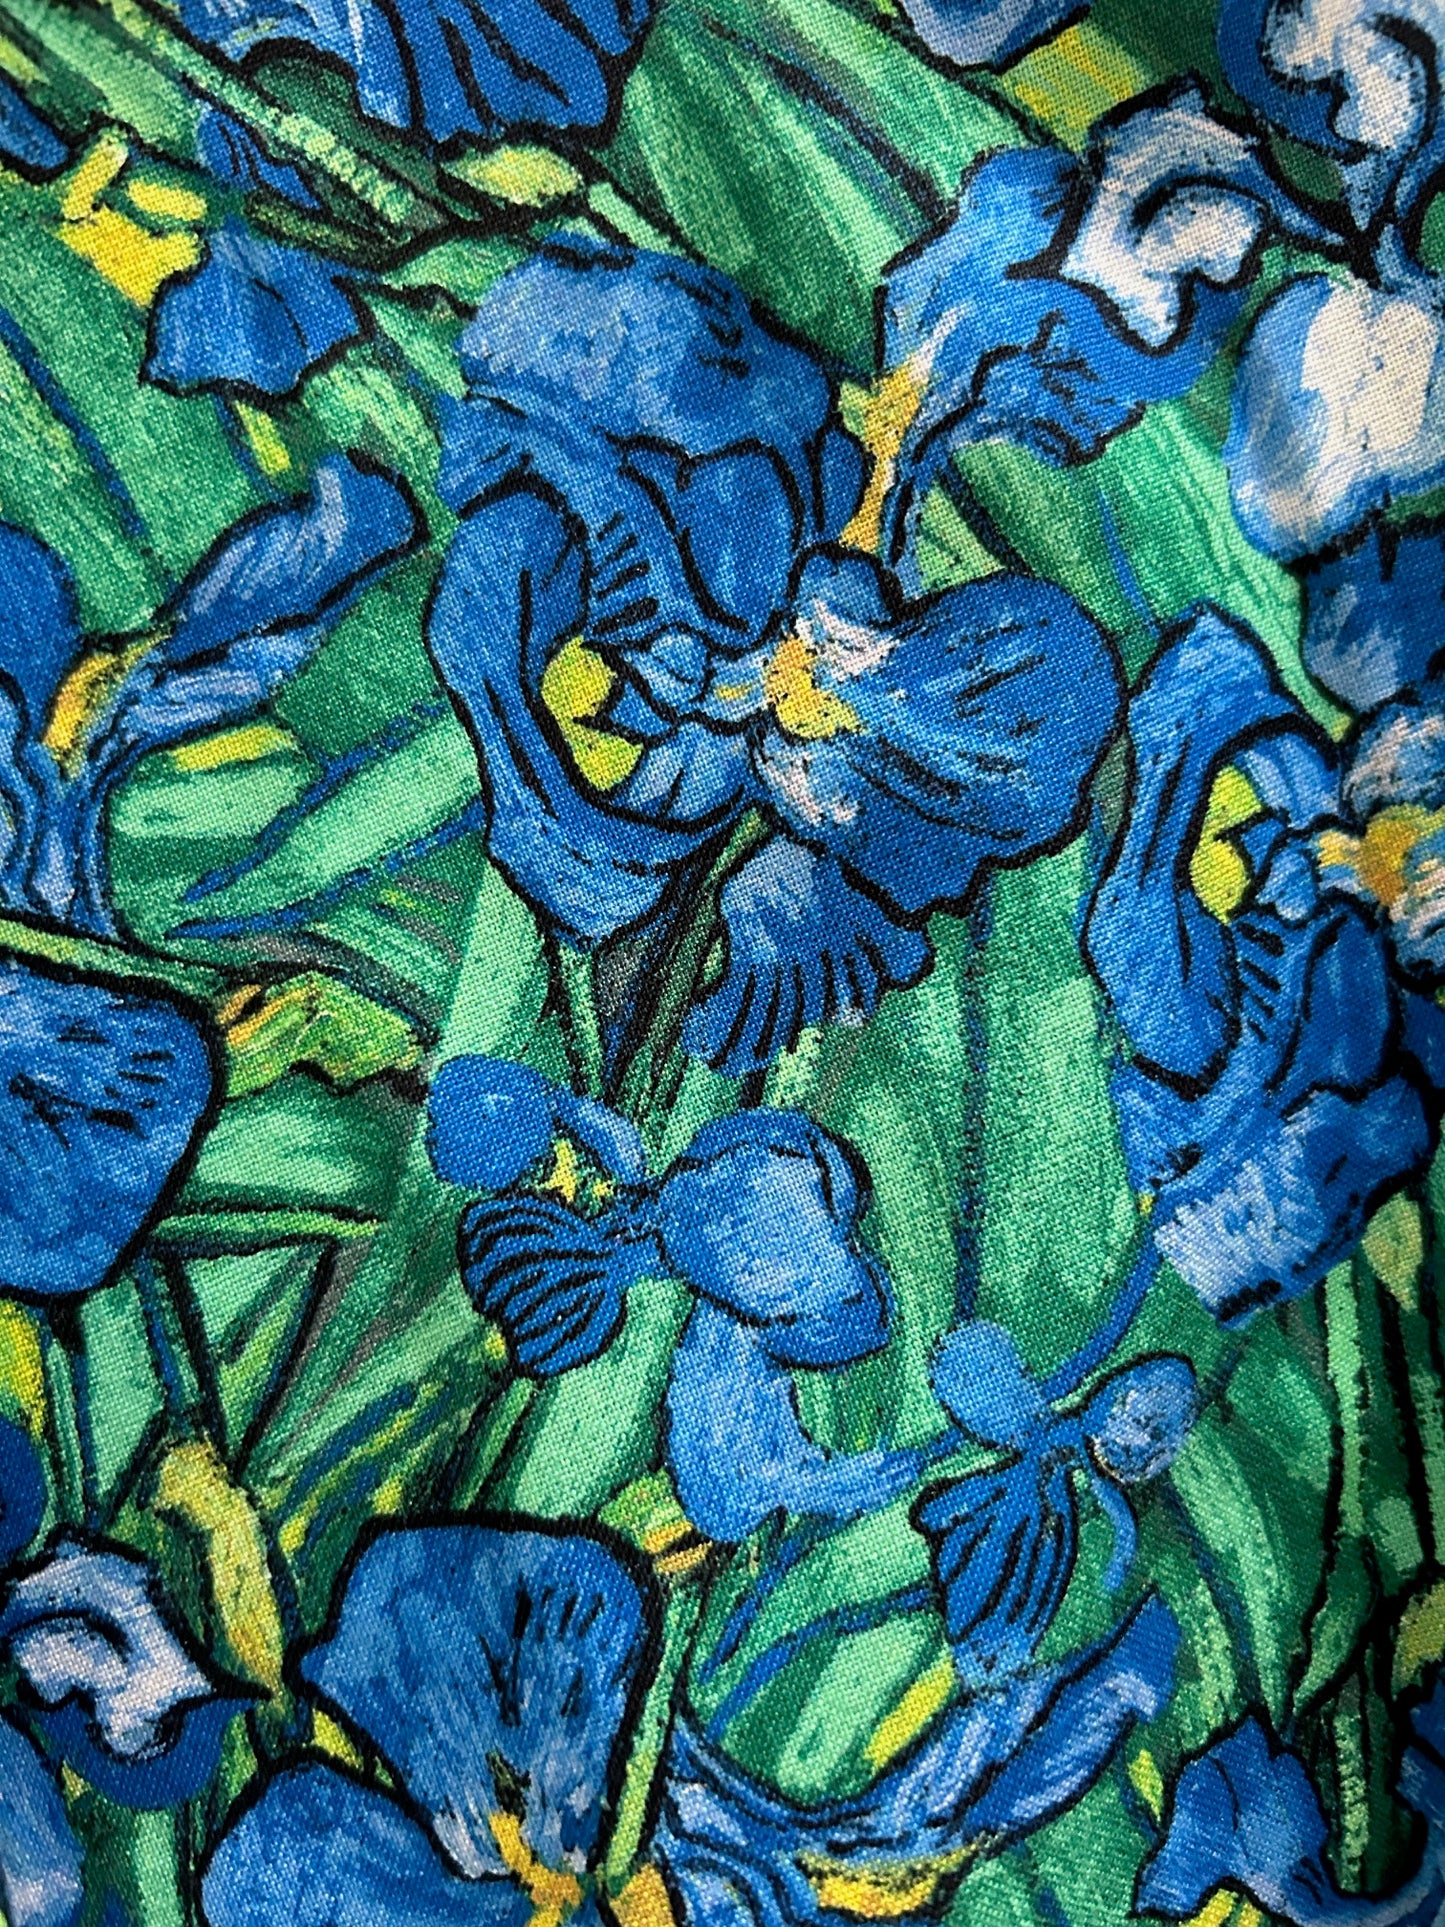 close up of the fabric showing the artsy painted look of the ireses